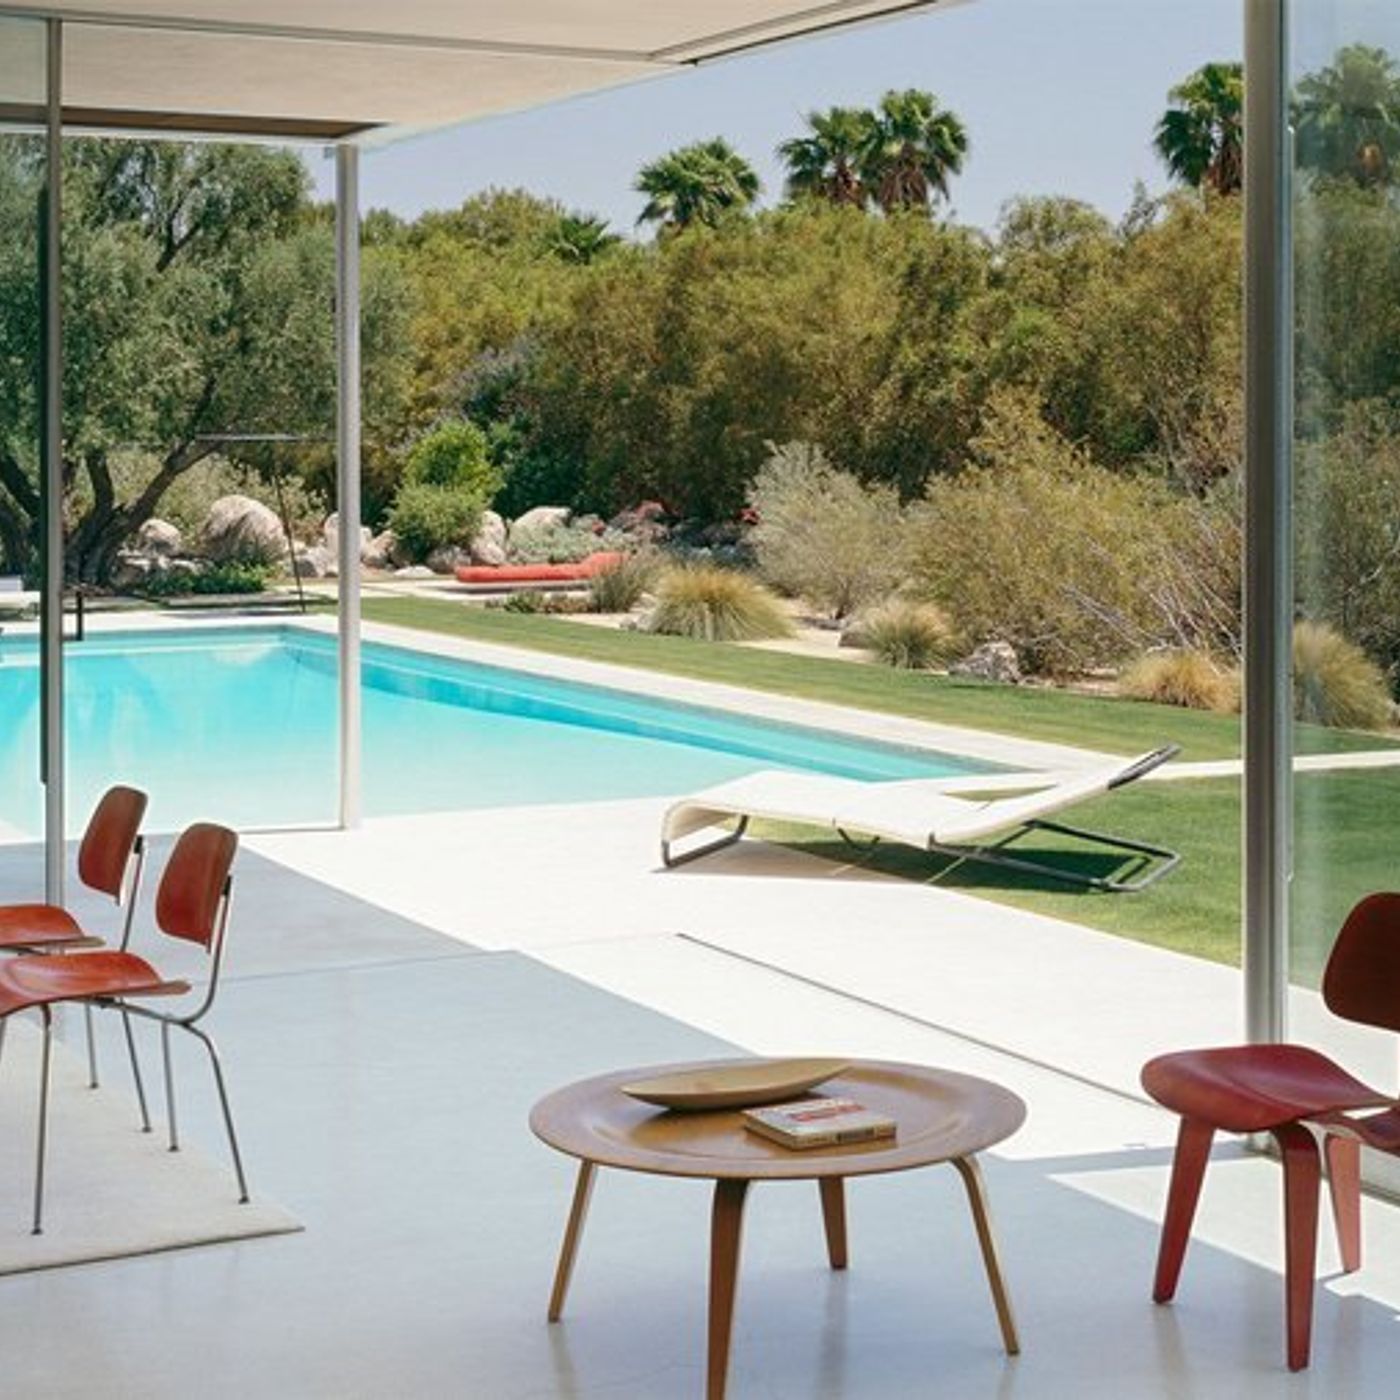 13: A Brief History of Modern Architecture in Palm Springs